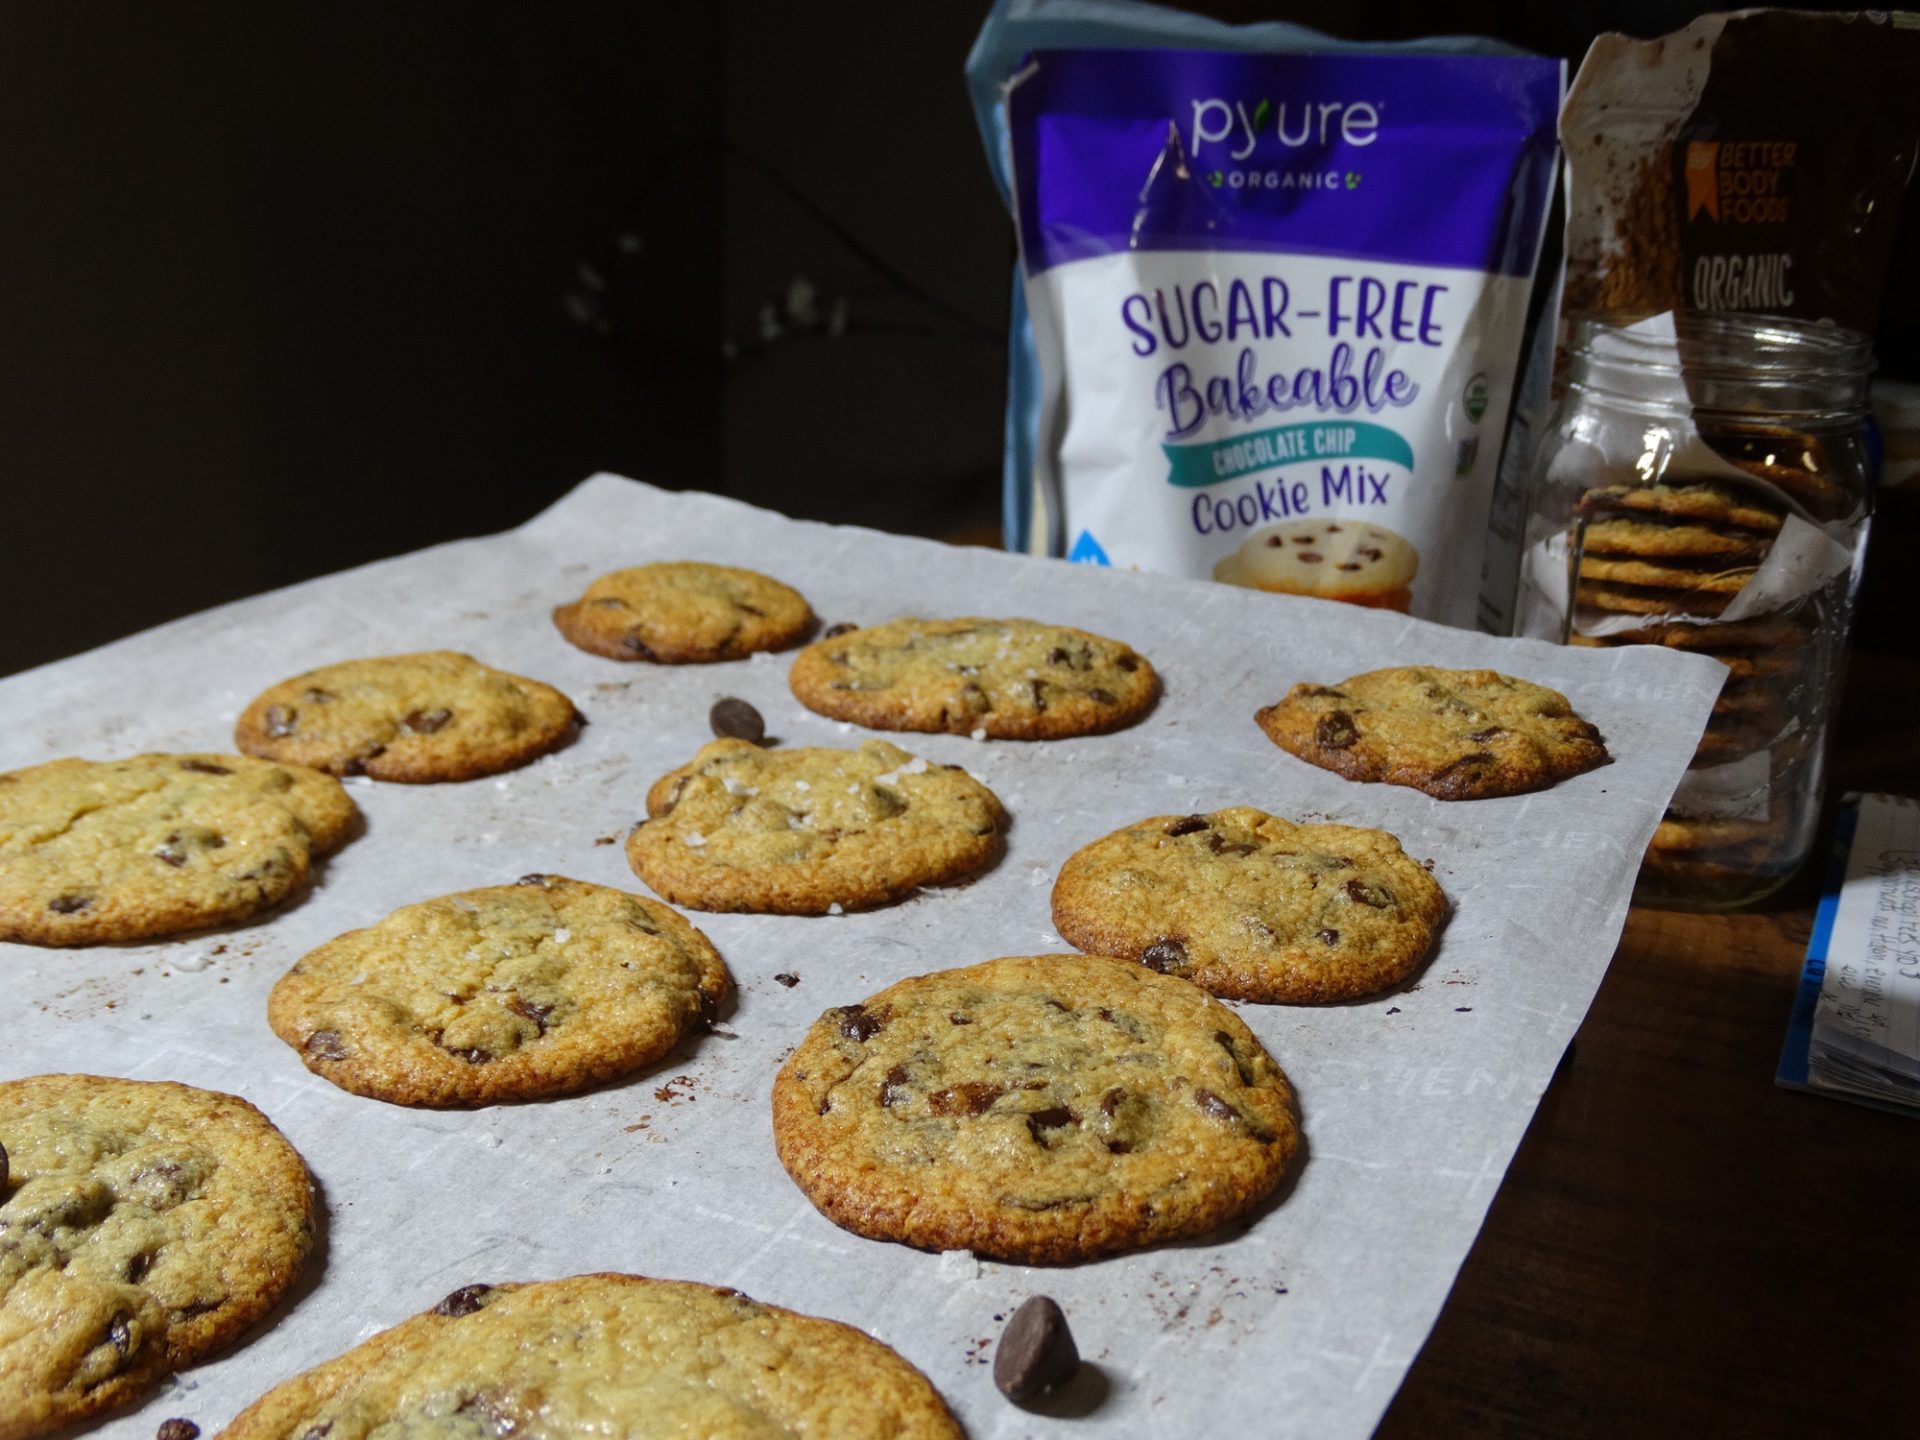 Enough to share with all of your sugar free friends! Keto and THM sugar free, low carb, gluten free bake mixes from Pyure Organic!